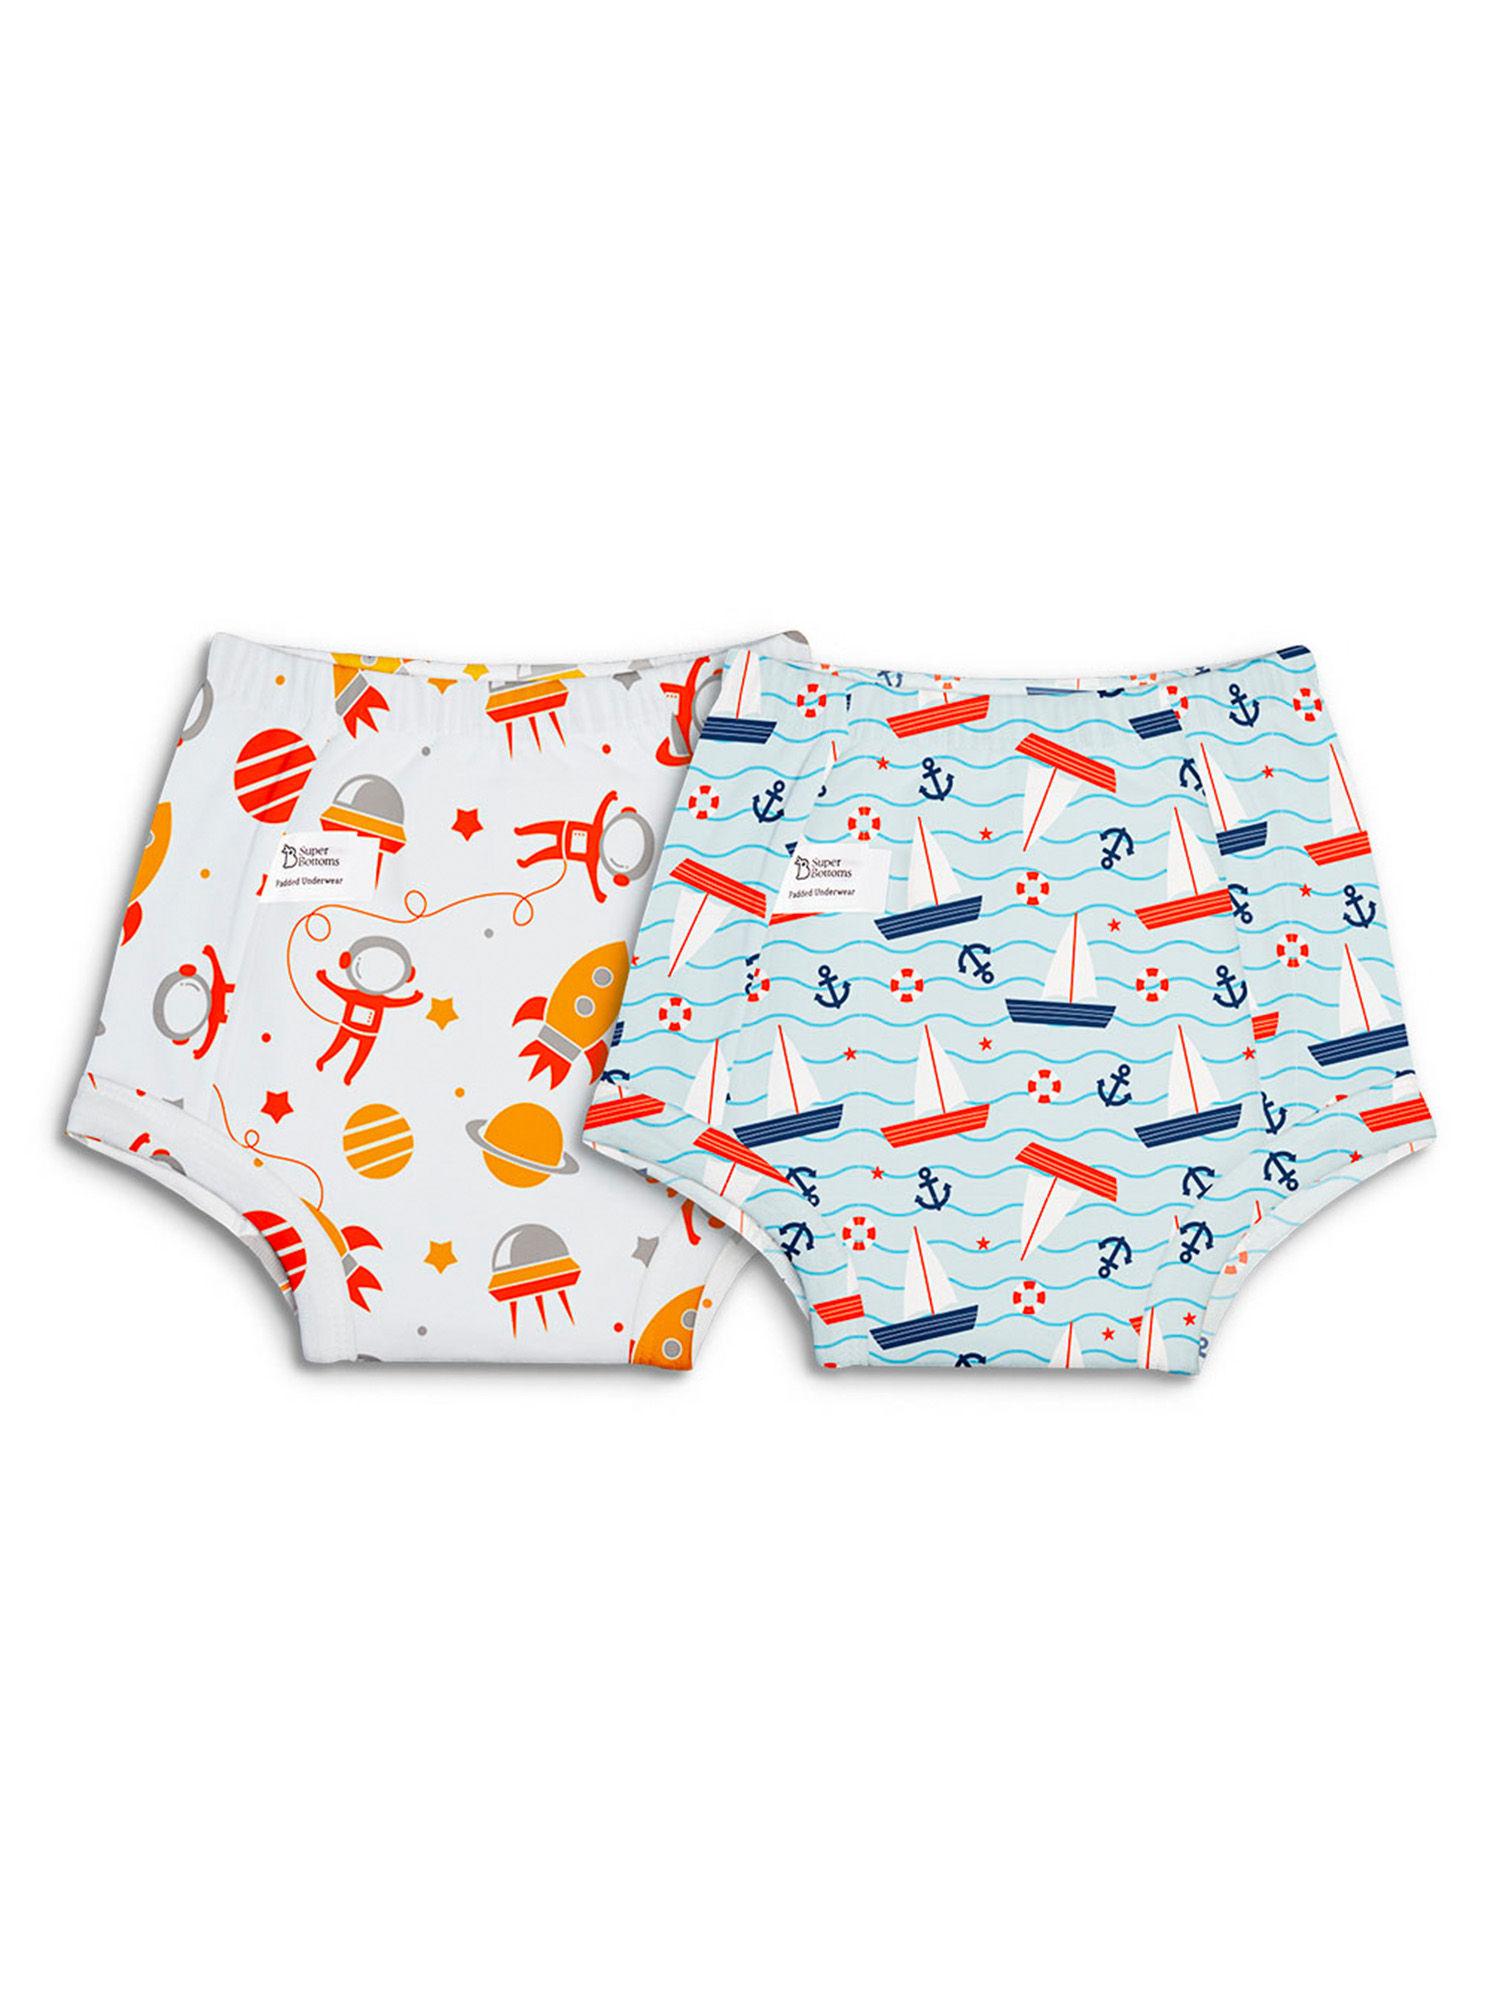 padded-potty-training-unisex-underwear-need-space-sea-you-(pack-of-2)